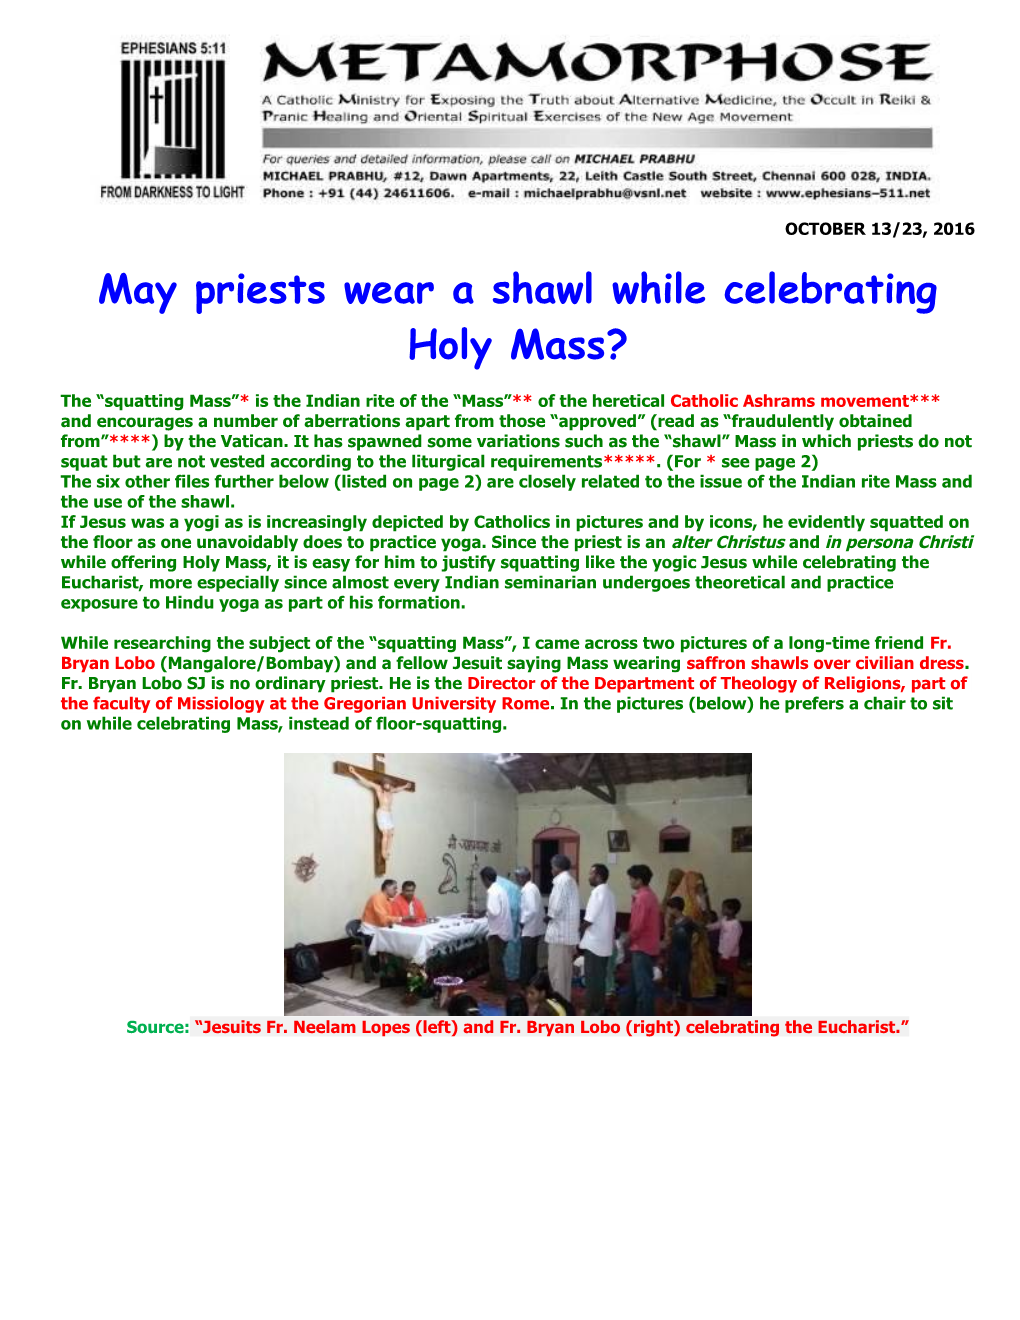 May Priests Wear a Shawl While Celebrating Holy Mass?